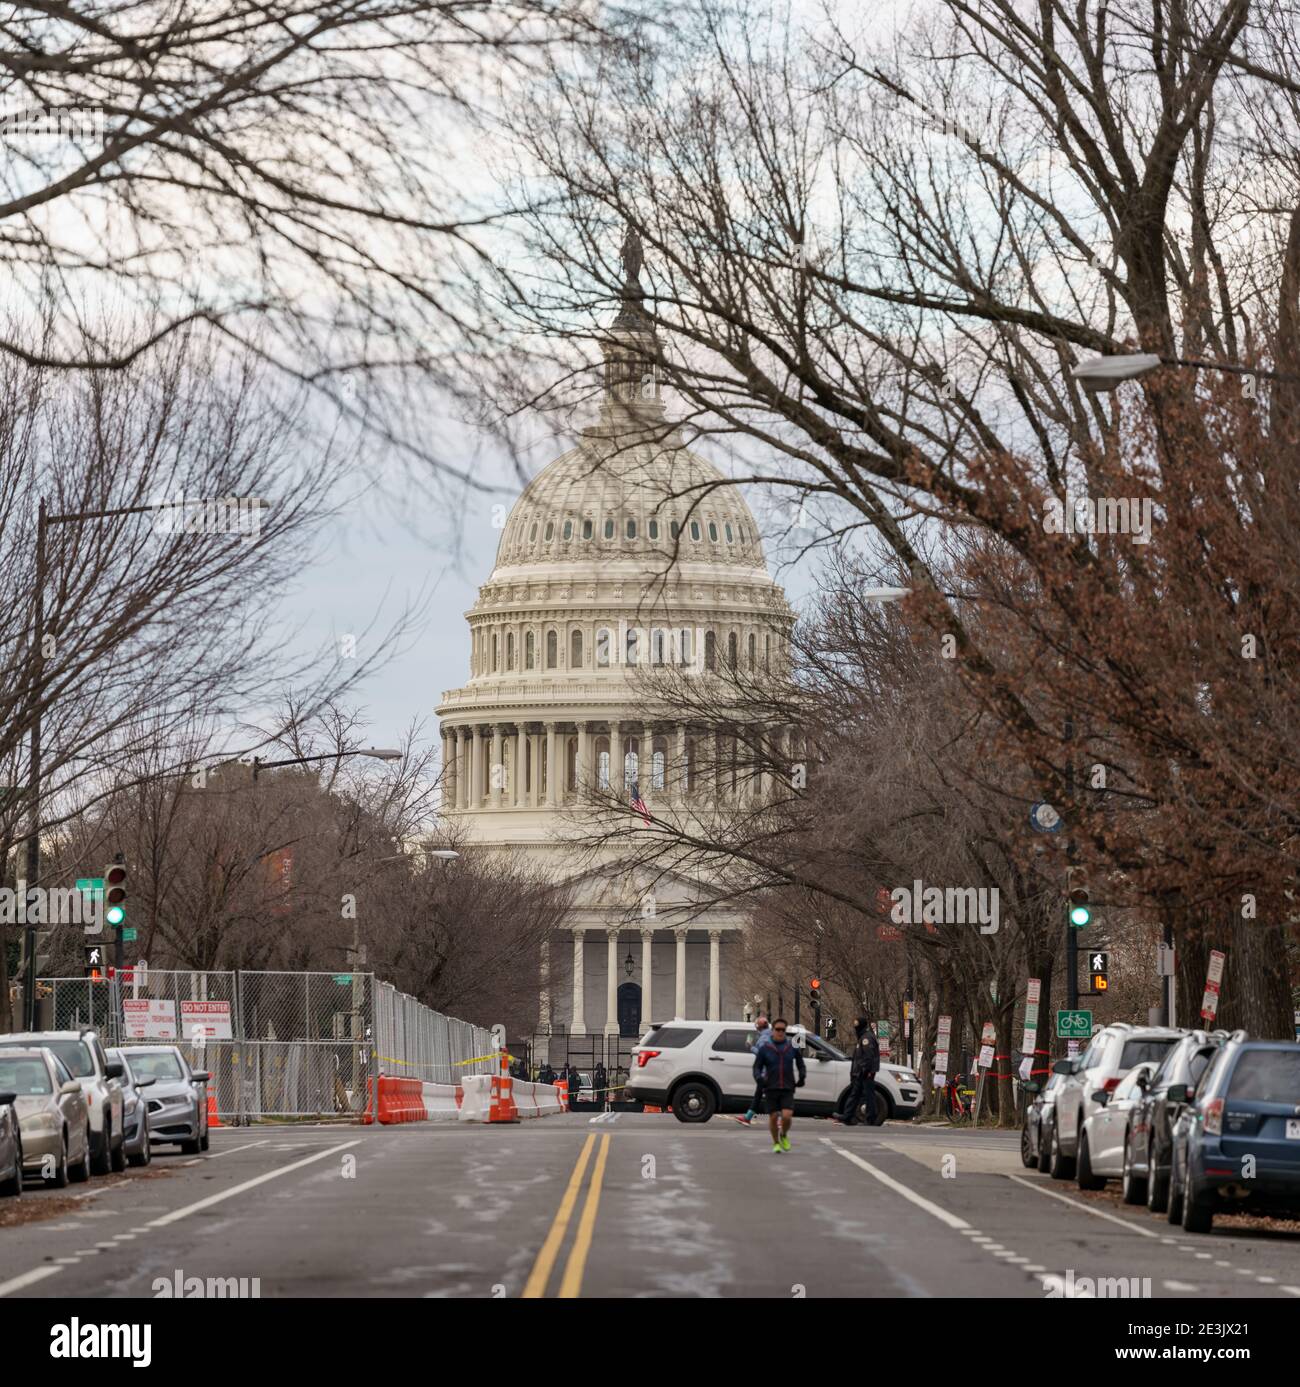 Washington DC, USA - January 17, 2021: Streets blocked in Washington DC with view of US Capitol Building Stock Photo